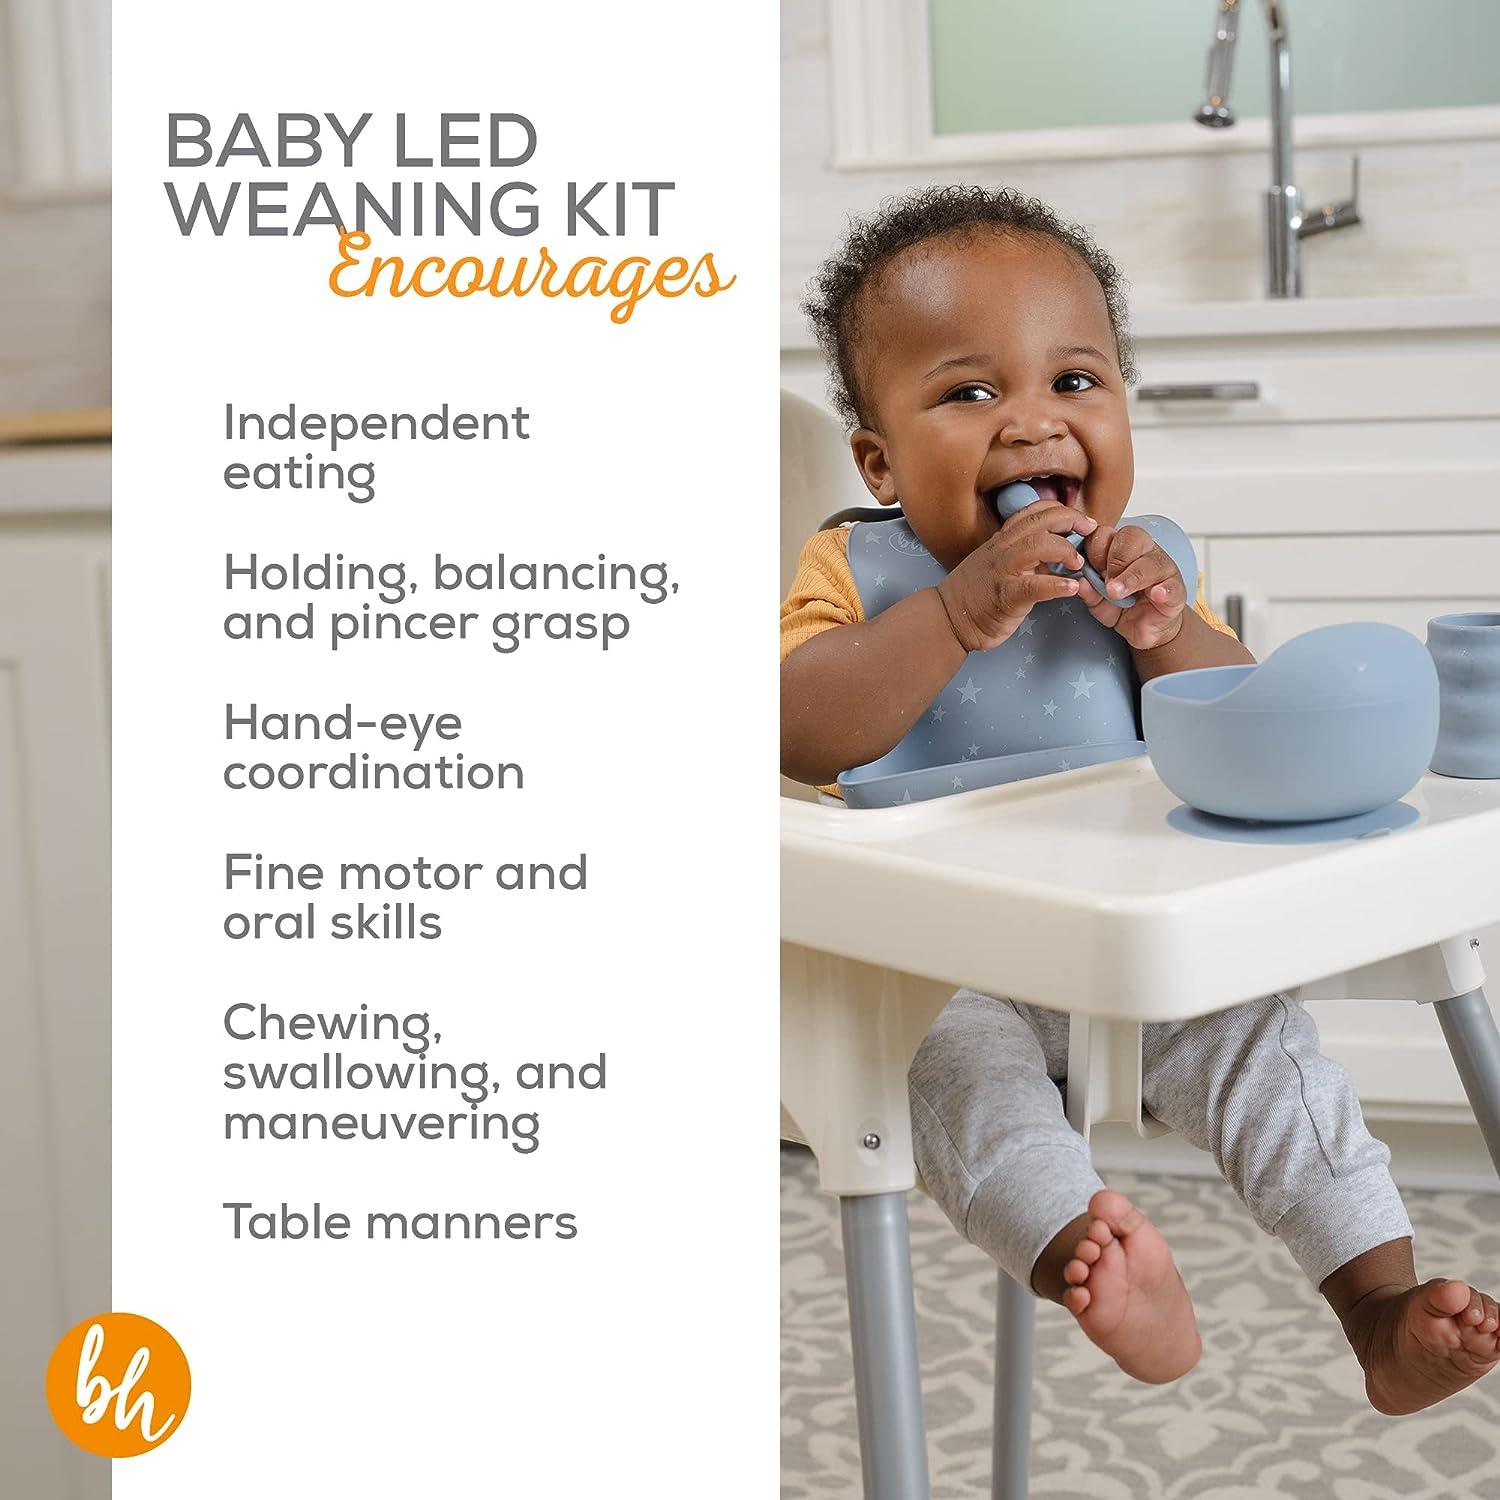 BooginHead Baby Led Weaning Supplies - Stage 1 and Stage 2 Self Feeding  5-Piece Set Blue Baby Led Blue